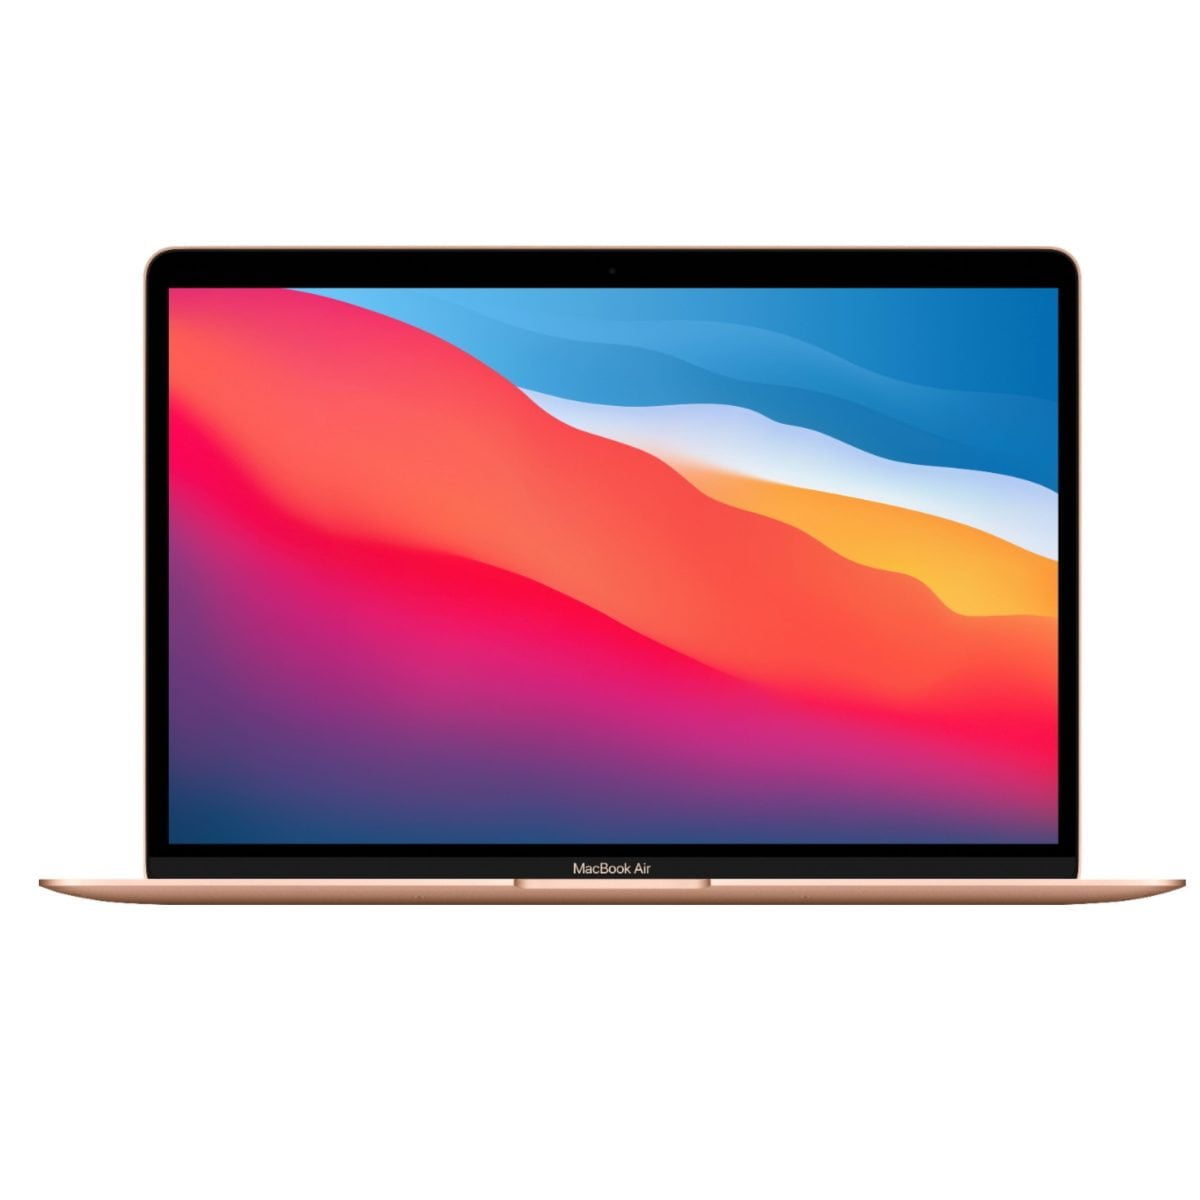 6418599 Sd Scaled Apple &Amp;Lt;H1 Class=&Amp;Quot;Heading-5 V-Fw-Regular&Amp;Quot;&Amp;Gt;Macbook Air 13&Amp;Quot; Laptop - Apple M1 Chip - 8Gb Memory - 512Gb Ssd (Latest Model) - Gold (English Keyboard)&Amp;Lt;/H1&Amp;Gt; Https://Www.youtube.com/Watch?V=Hs1Hols4Sd0 &Amp;Lt;Span Class=&Amp;Quot;Product-Data-Label Body-Copy&Amp;Quot;&Amp;Gt;&Amp;Lt;Strong&Amp;Gt;Model&Amp;Lt;/Strong&Amp;Gt;:&Amp;Lt;/Span&Amp;Gt;&Amp;Lt;Span Class=&Amp;Quot;Product-Data-Value Body-Copy&Amp;Quot;&Amp;Gt;Mgnn3, &Amp;Lt;/Span&Amp;Gt;Apple Macbook Air 13 Thinnest And Lightest Notebook Gets Supercharged With The Apple M1 Chip. Tackle Your Projects With The Blazing-Fast 8-Core Cpu. Take Graphics-Intensive Apps And Games To The Next Level With The 8-Core Gpu. And Accelerate Machine Learning Tasks With The 16-Core Neural Engine. Macbook Air Macbook Air 13&Amp;Quot; Laptop - Apple M1 Chip - 8Gb Memory - 512Gb Ssd (Latest Model) - Gold